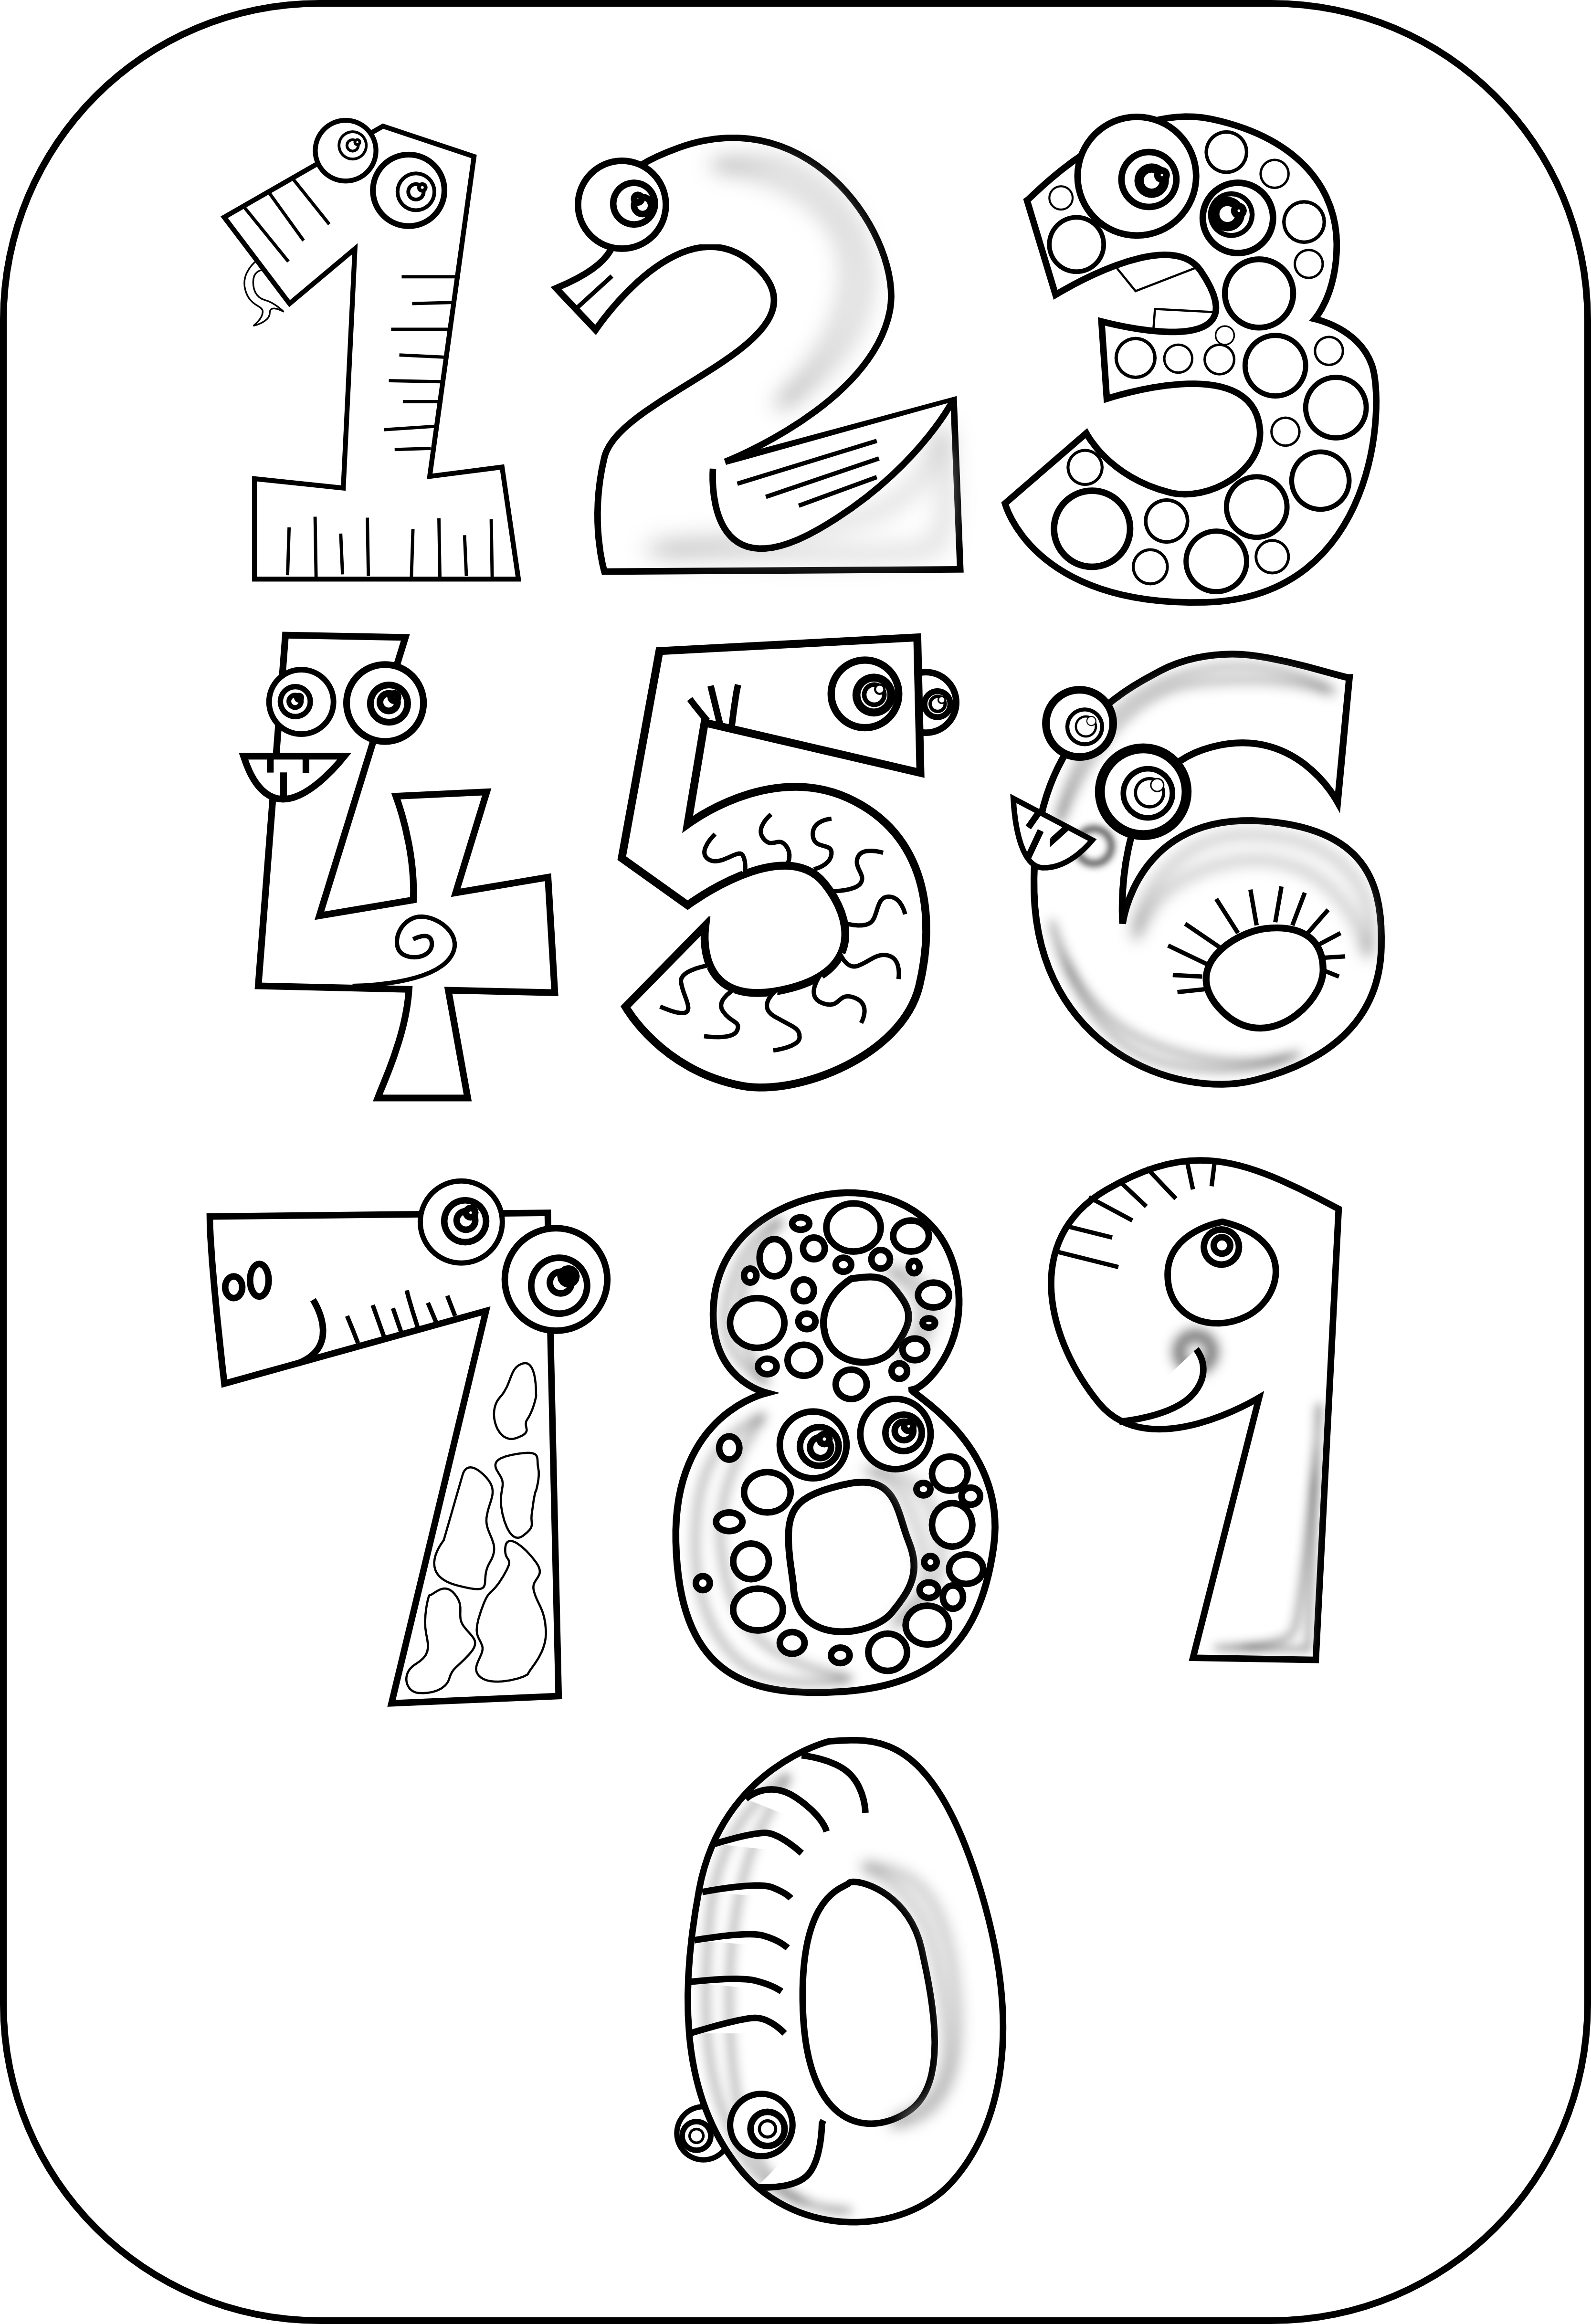 number clipart black and white